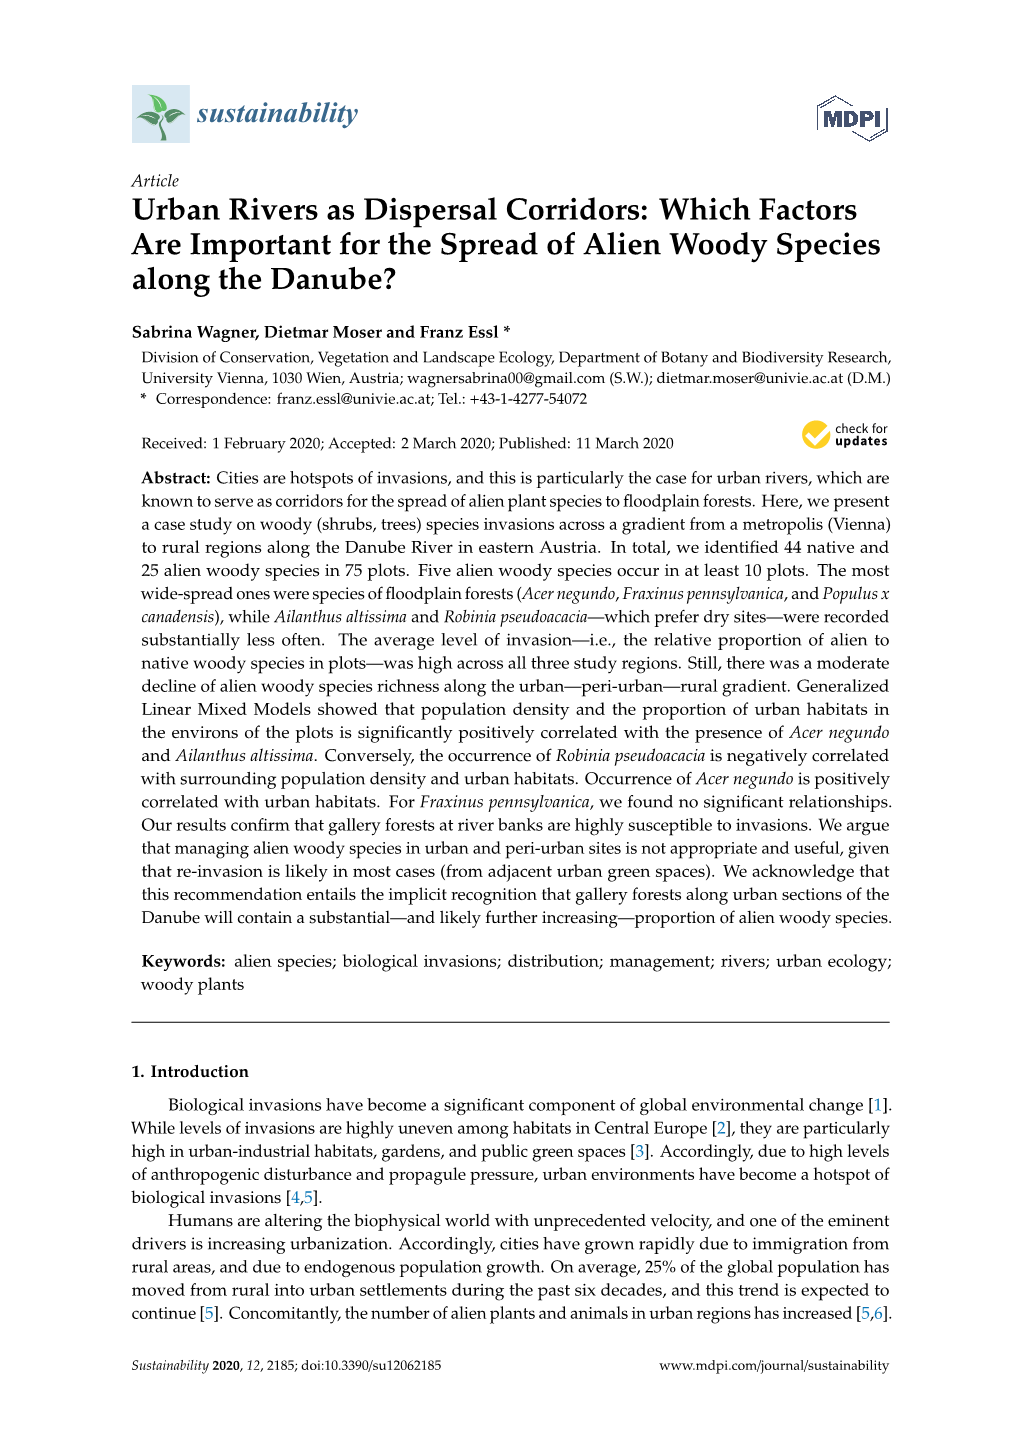 Which Factors Are Important for the Spread of Alien Woody Species Along the Danube?